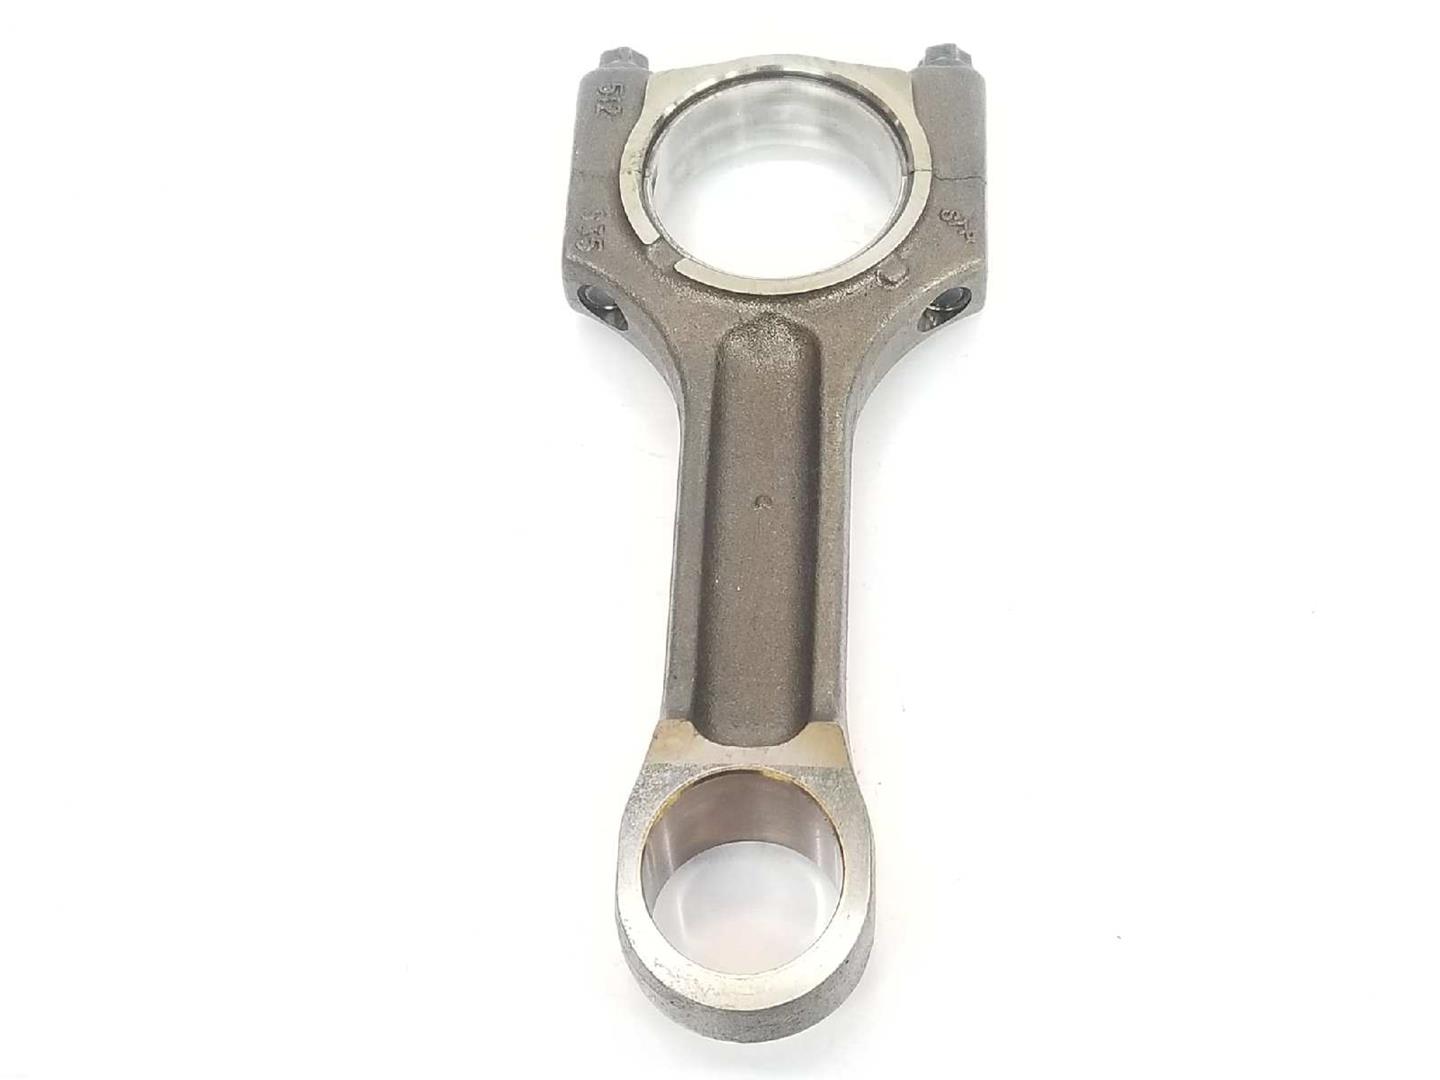 BMW X3 E83 (2003-2010) Connecting Rod 11247798368, 11247798368 19726863